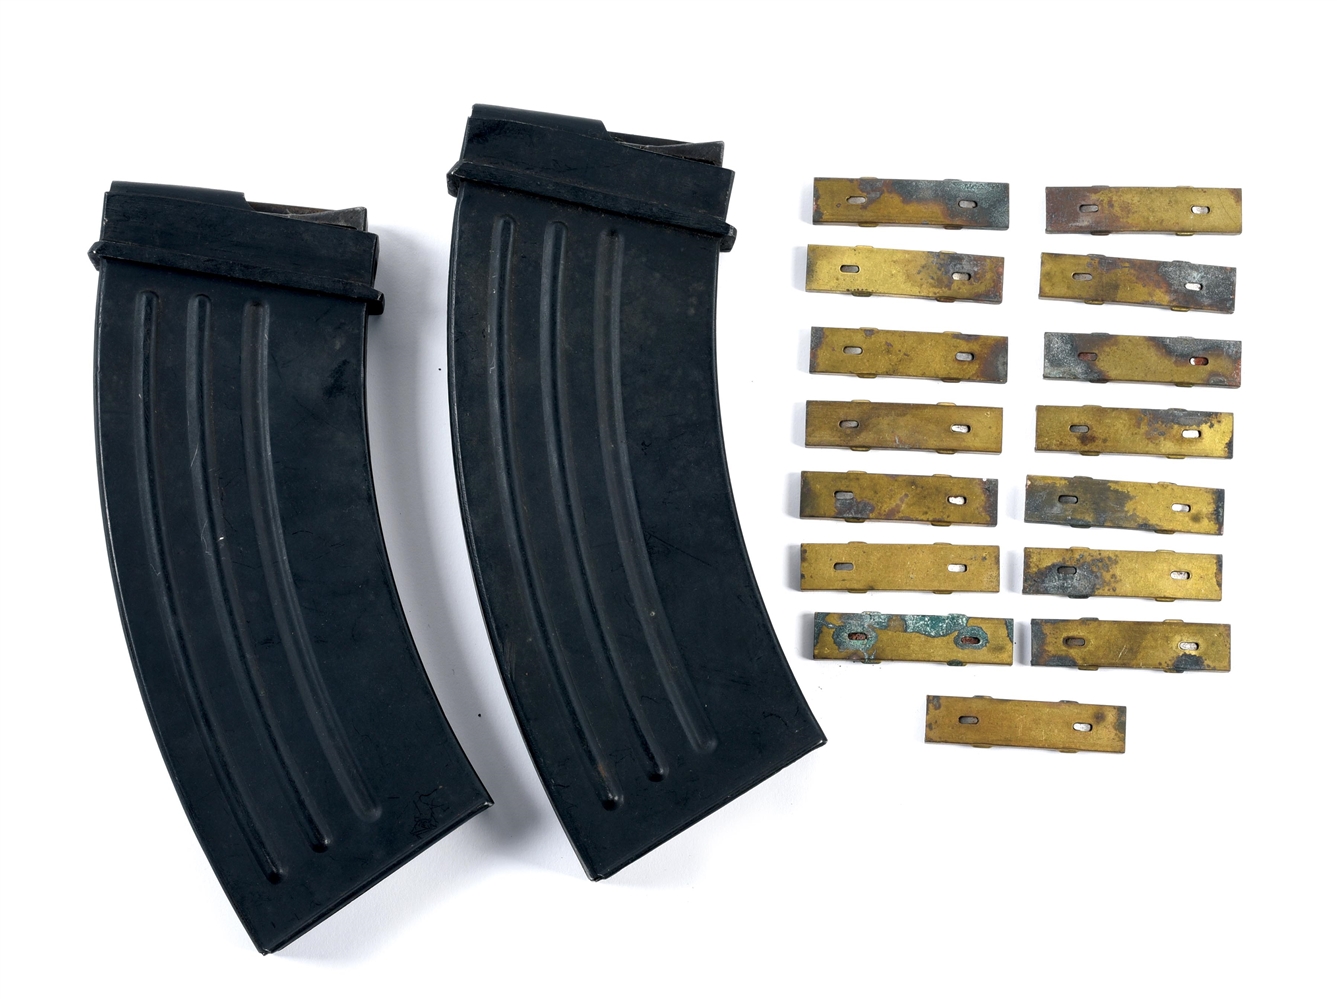 DESIRABLE LOT OF 2: JAPANESE TYPE 96 MAGAZINES AND 15 STRIPPER CLIPS.